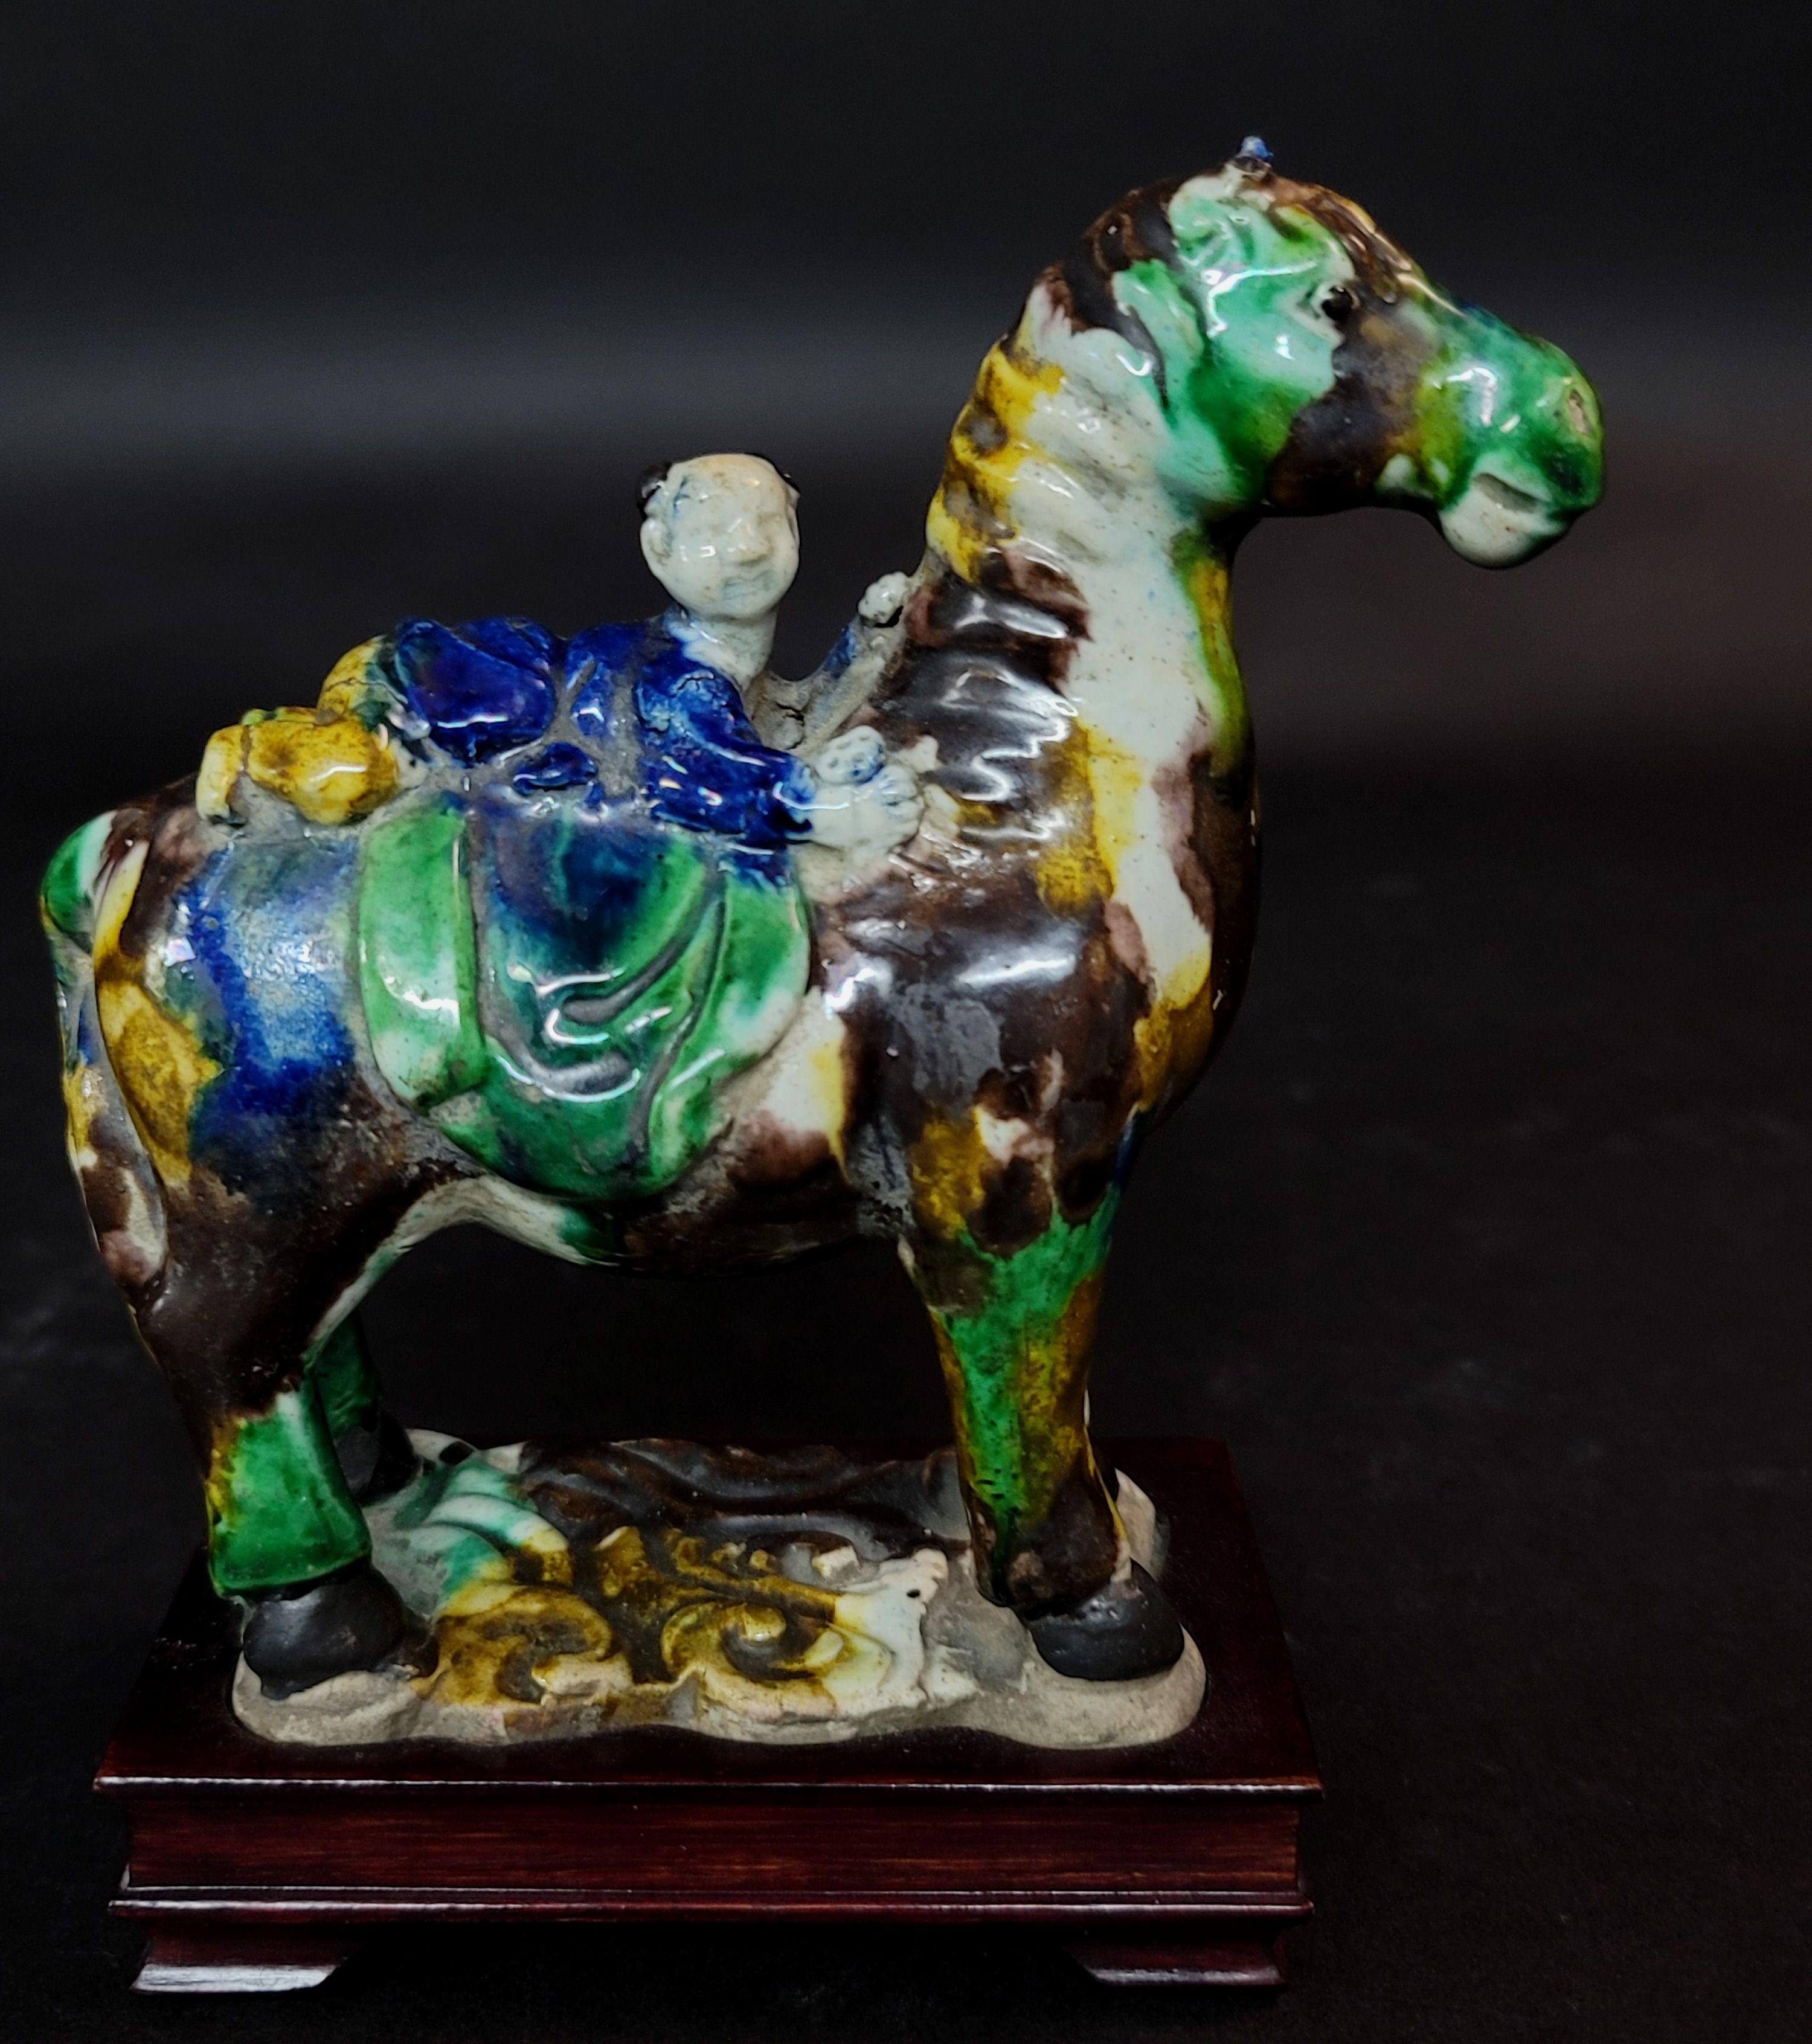 Chinese Su Sanci glazed figure of a horse and a boy. Sancai decoration uses glazes predominantly in three colours: brown or amber, green or creamy white with the more rare use of blue. While particularly associated with the Tang dynasty tomb